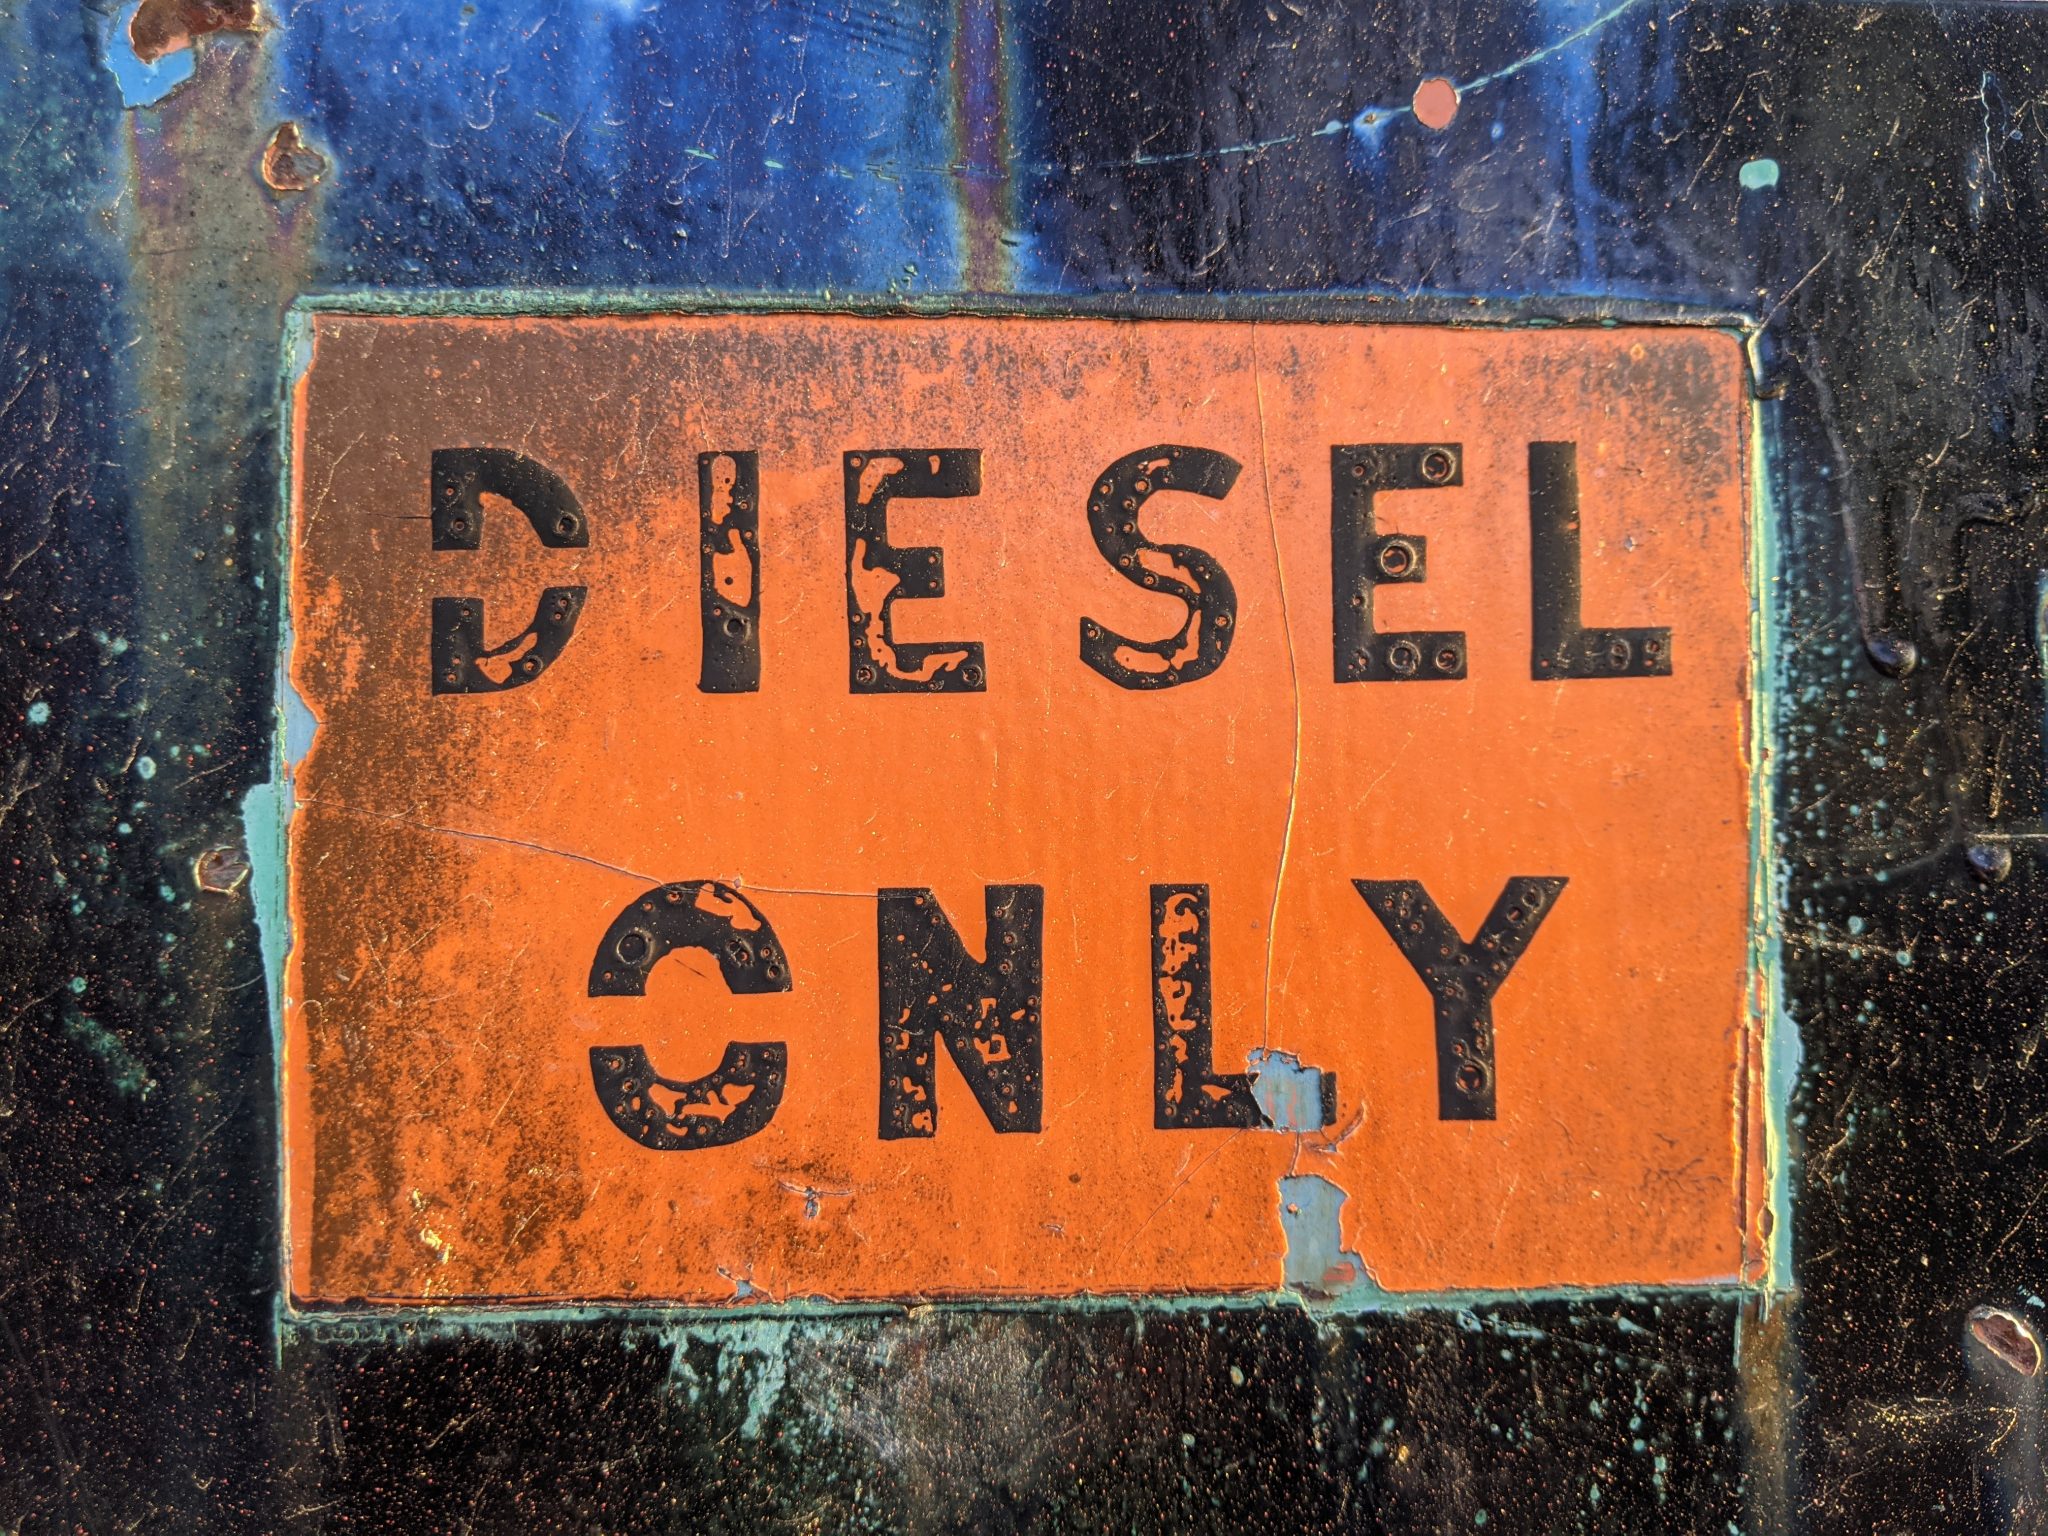 Old corroded sign that says "DIESEL ONLY"